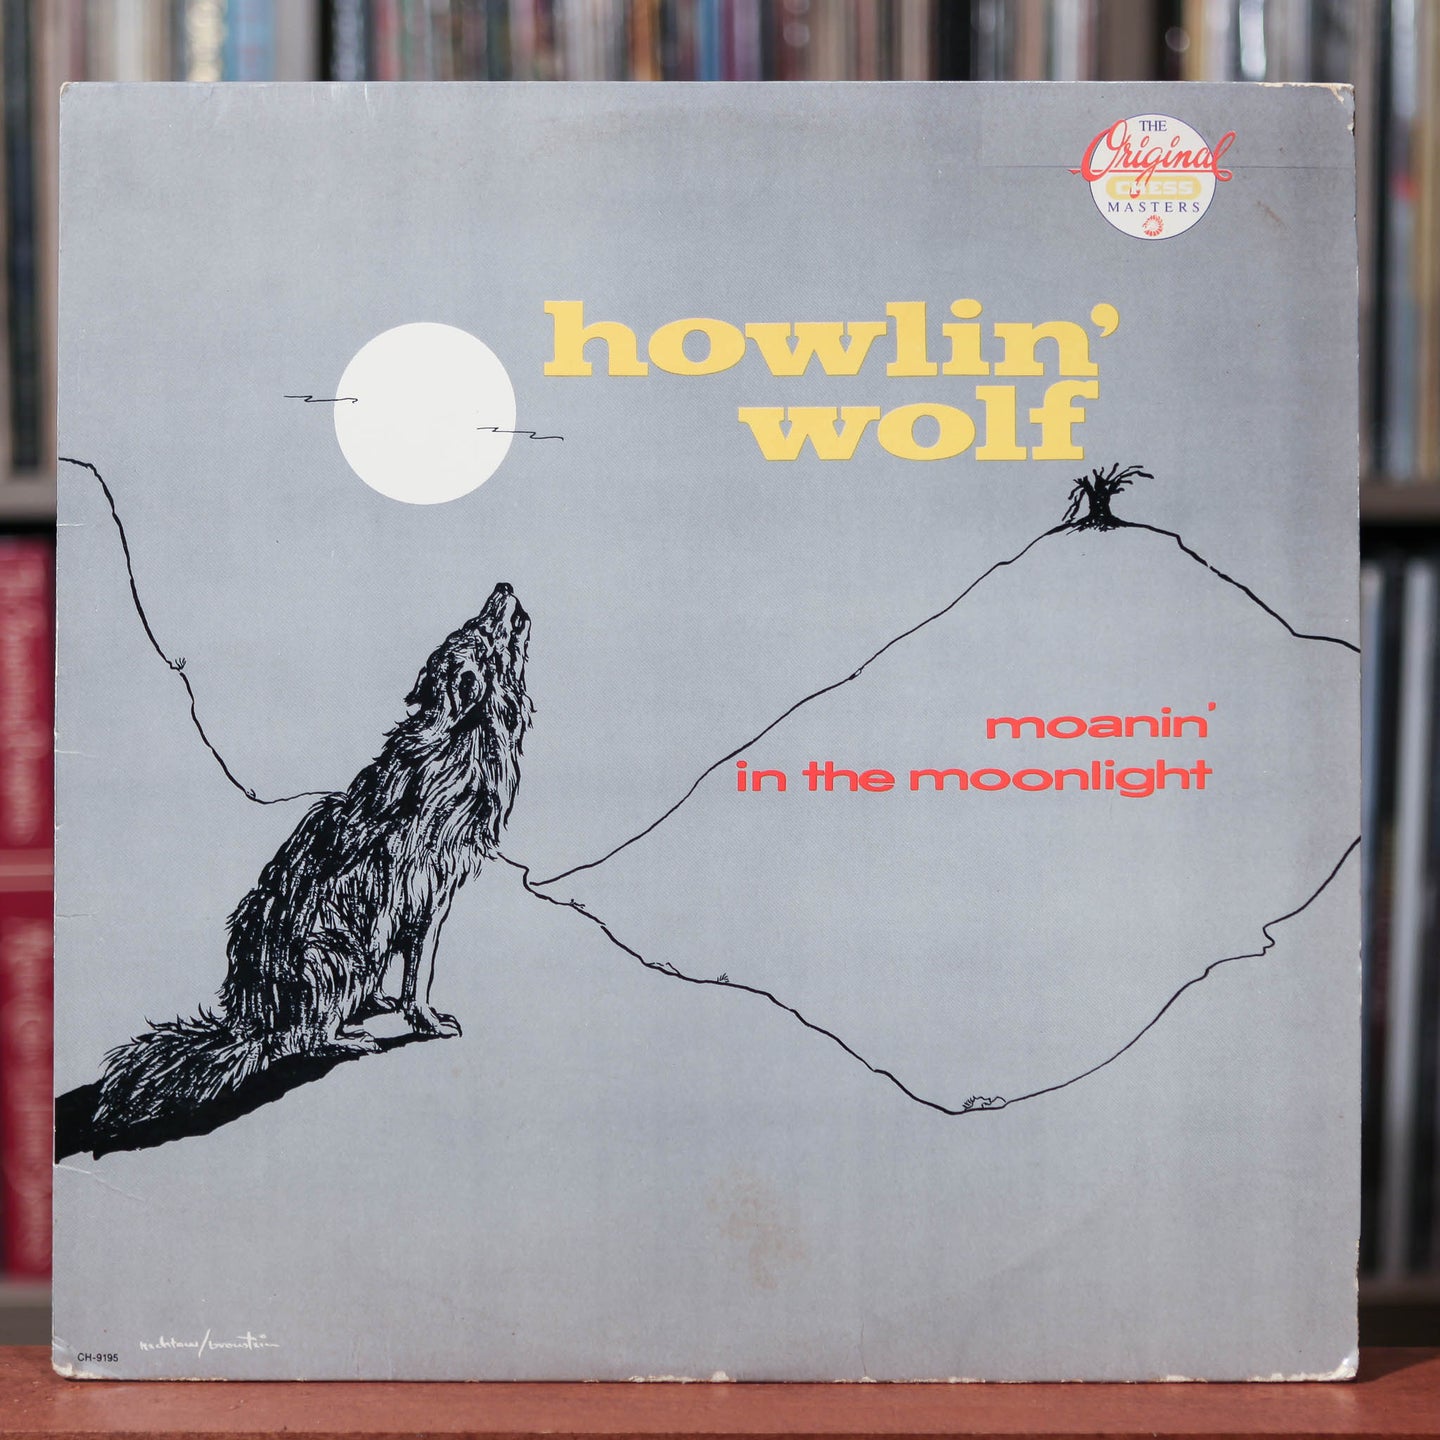 Howlin' Wolf - Moanin' In The Moonlight - 1986 Chess, VG/VG+